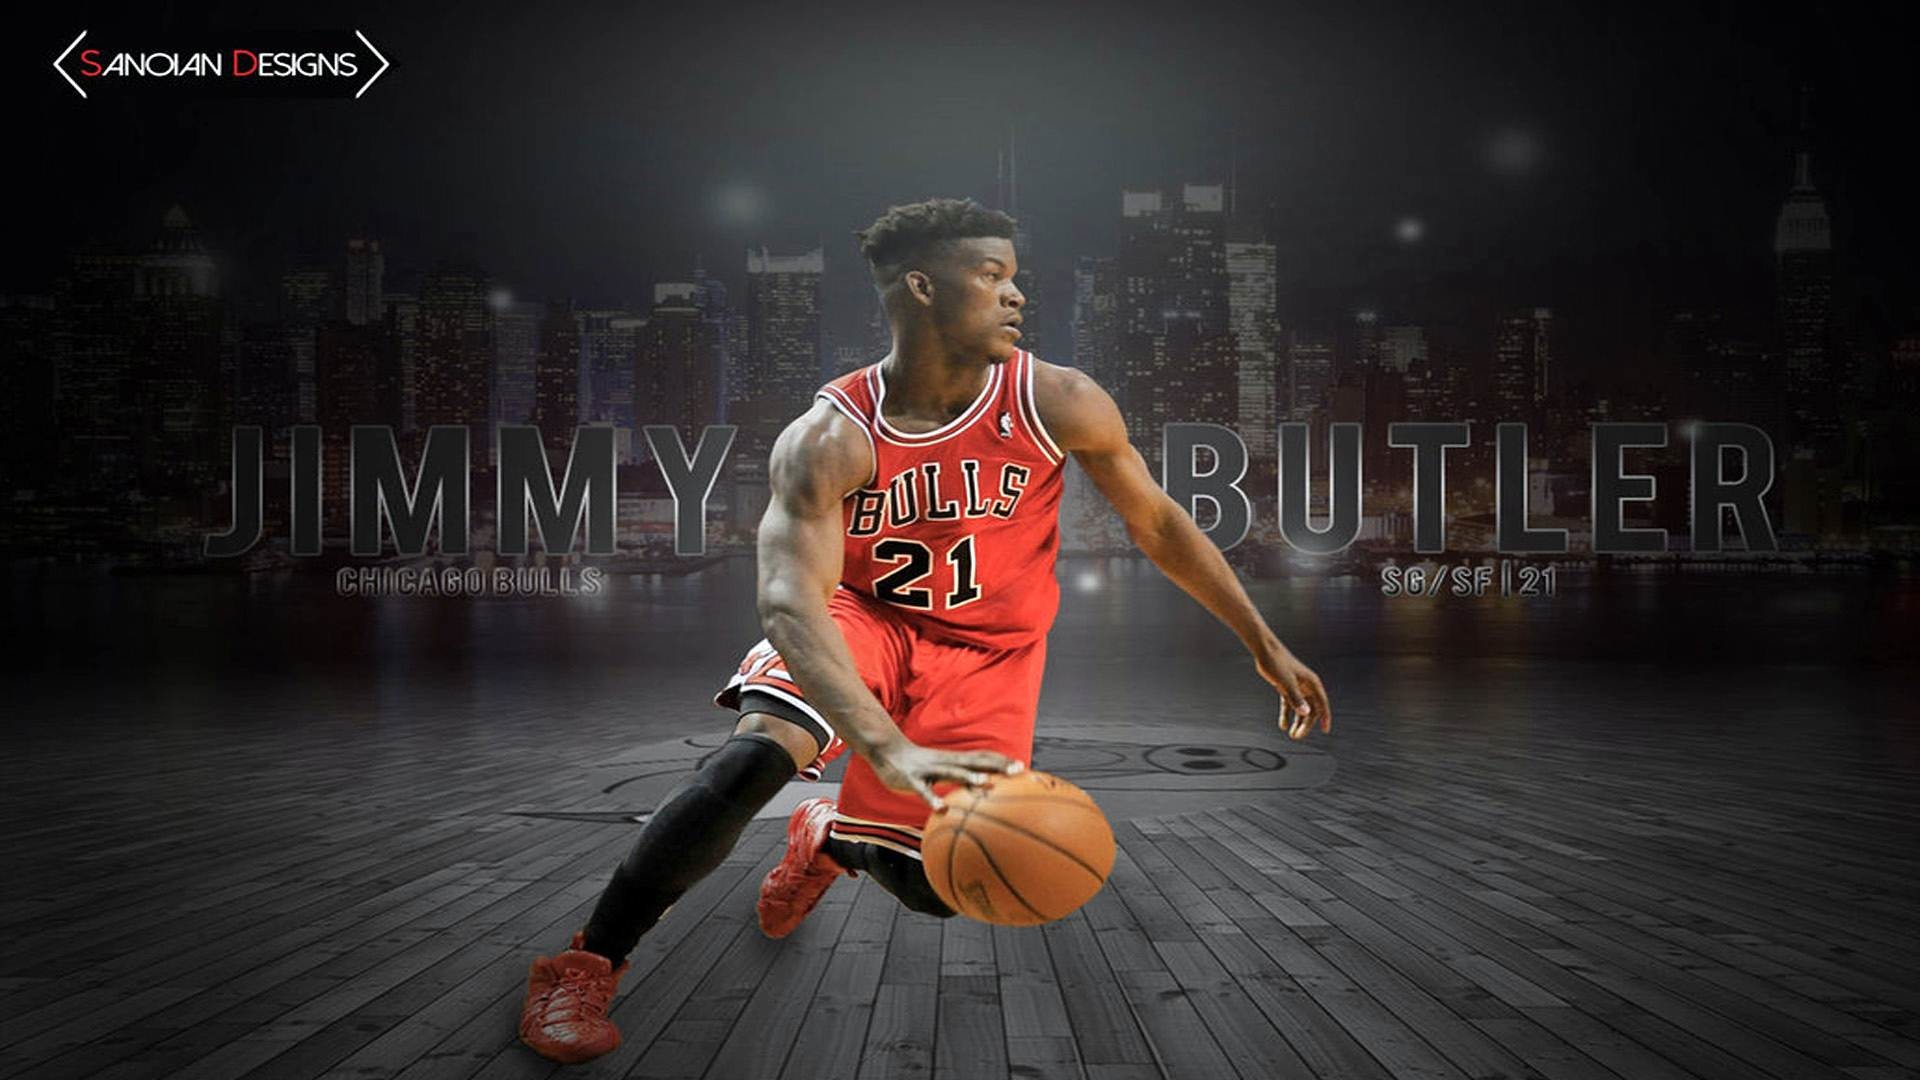 1920x1080 Jimmy Butler Wallpapers High Resolution and Quality Download